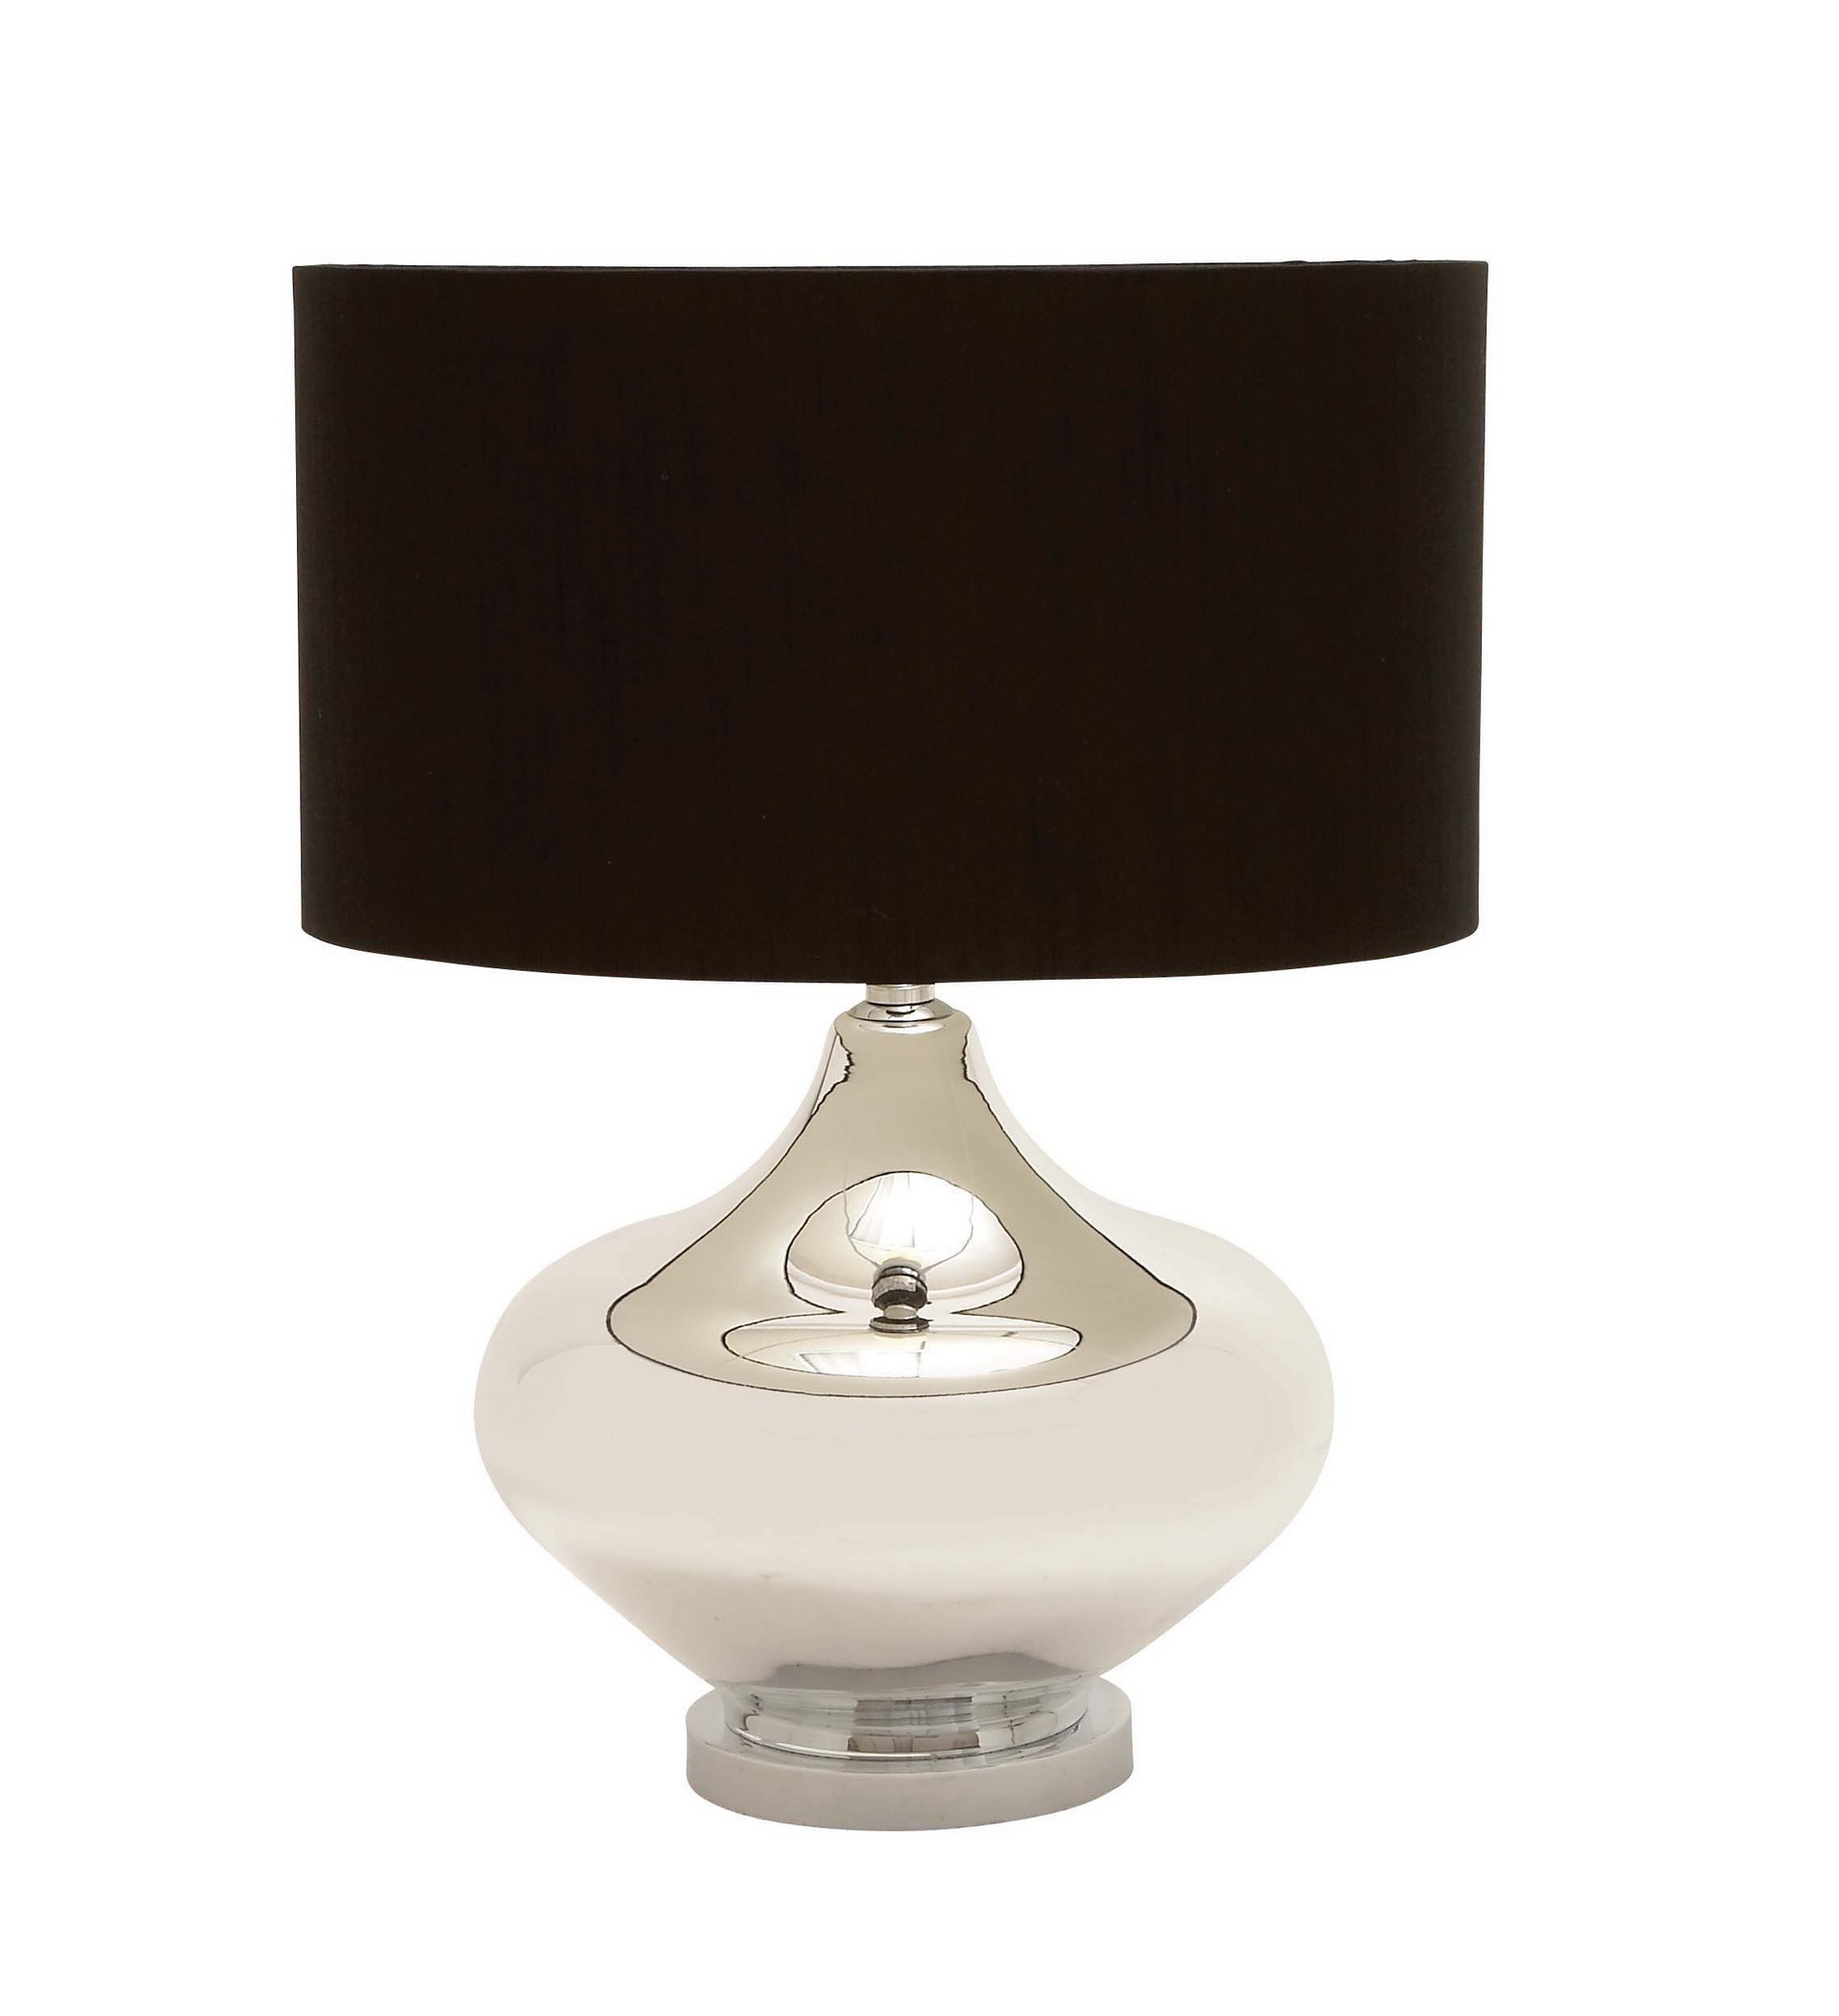 Elegant table lamps - 10 methods to restyle your house's interior